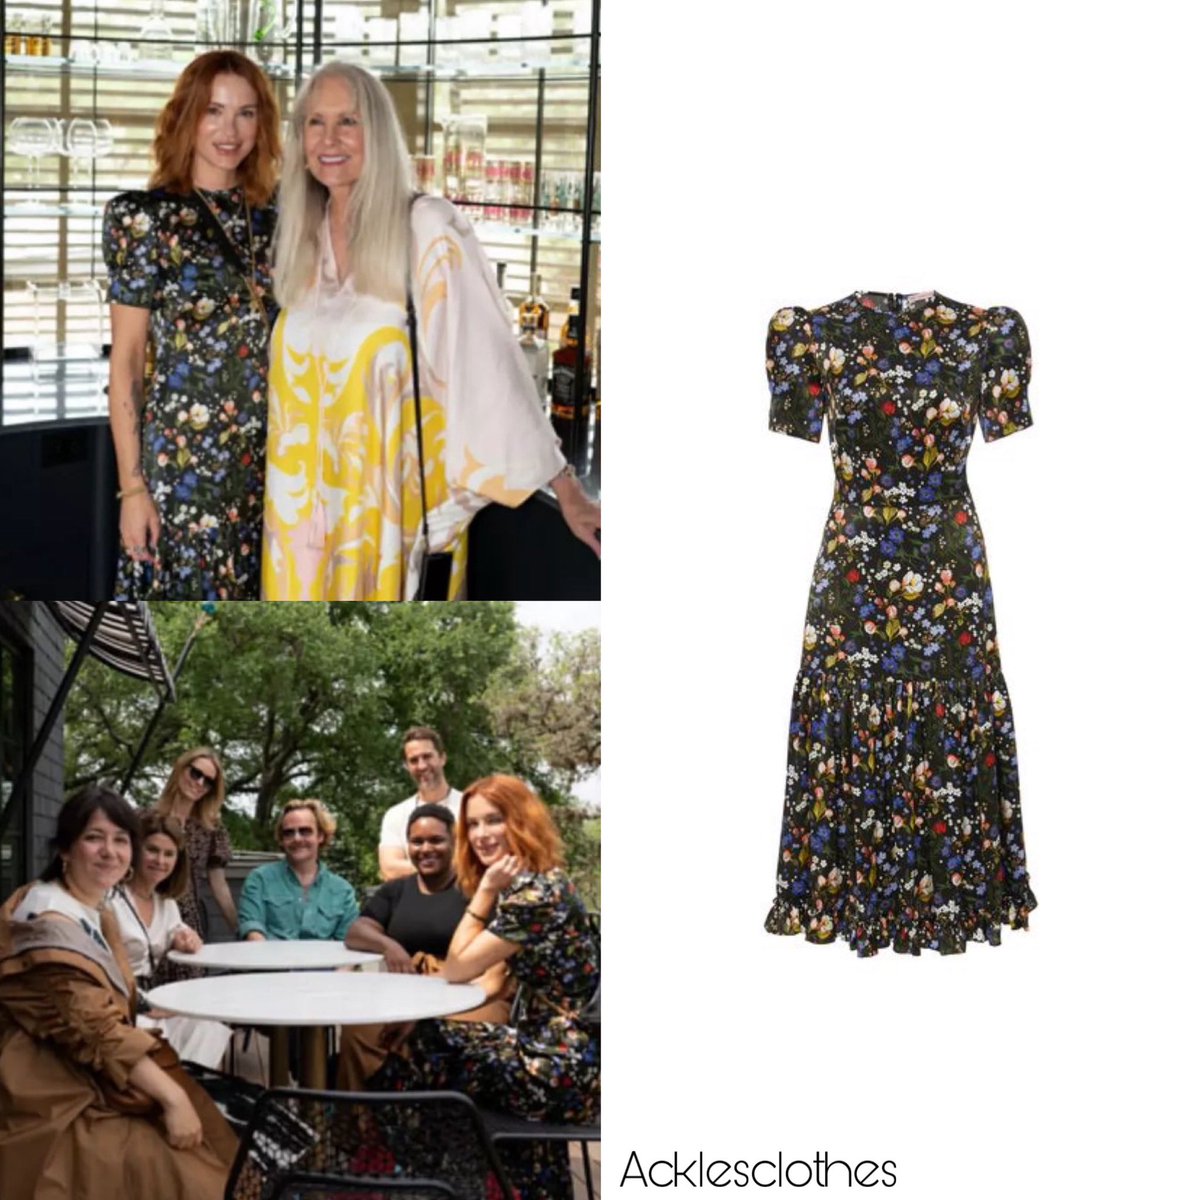 Back in 2021 for the Austin in Stereo Debut and Tour @DanneelHarris wore a @TheVampiresWife Hummingbird Print Satin Midi Dress which sold for $1,750 but is currently sold out.